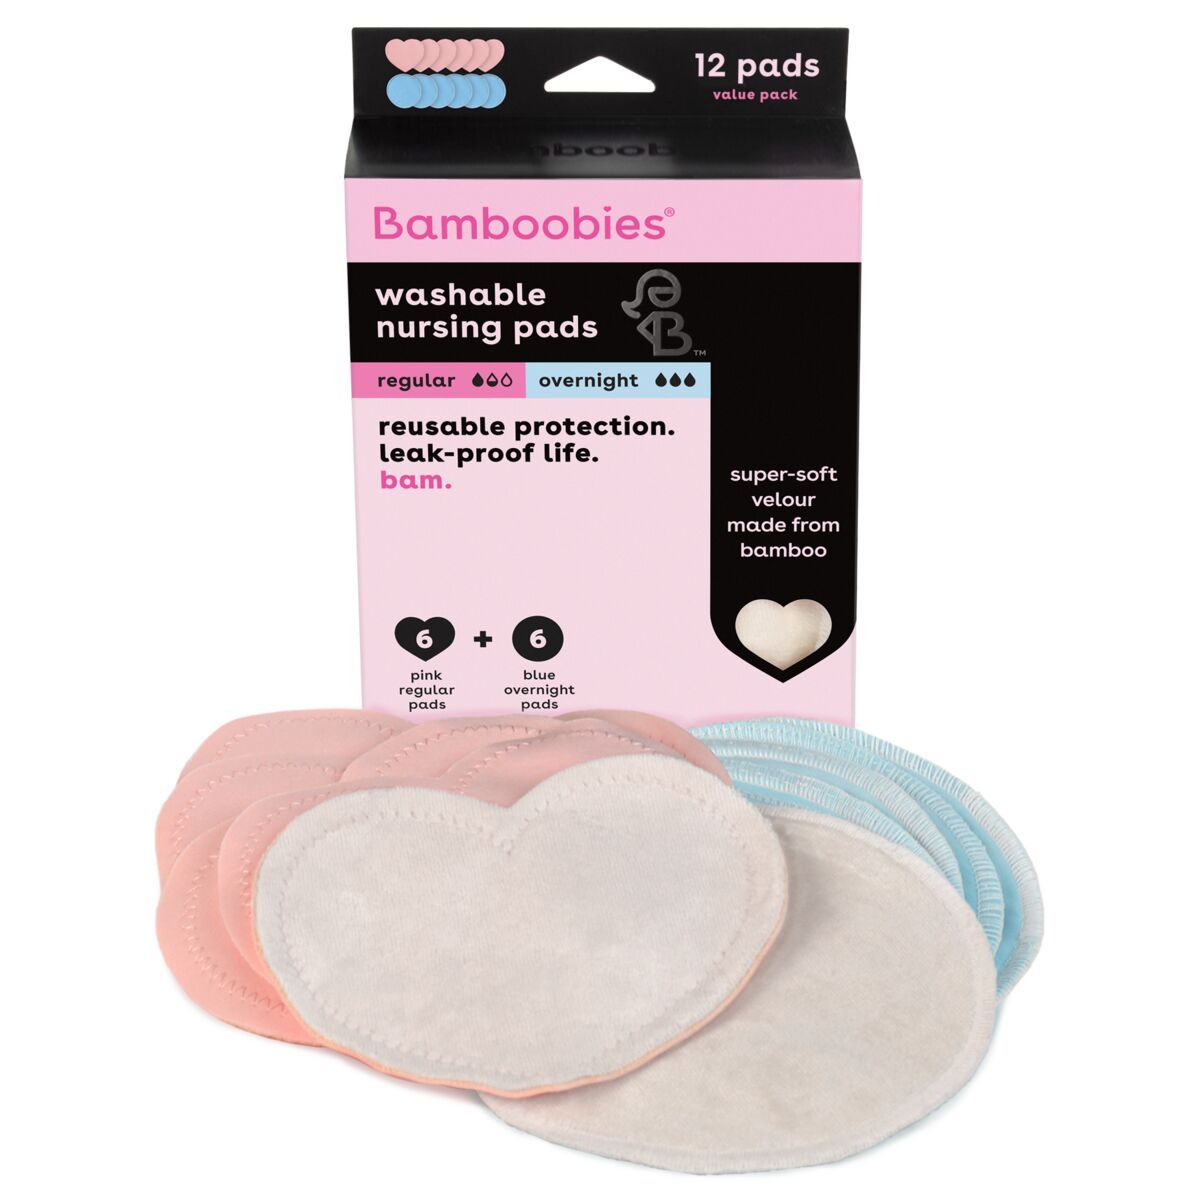 Leak Proof Mommy Bundle | Washable & Disposable Nursing Pads Kit for Every Situation, Whether at Home or on The Go